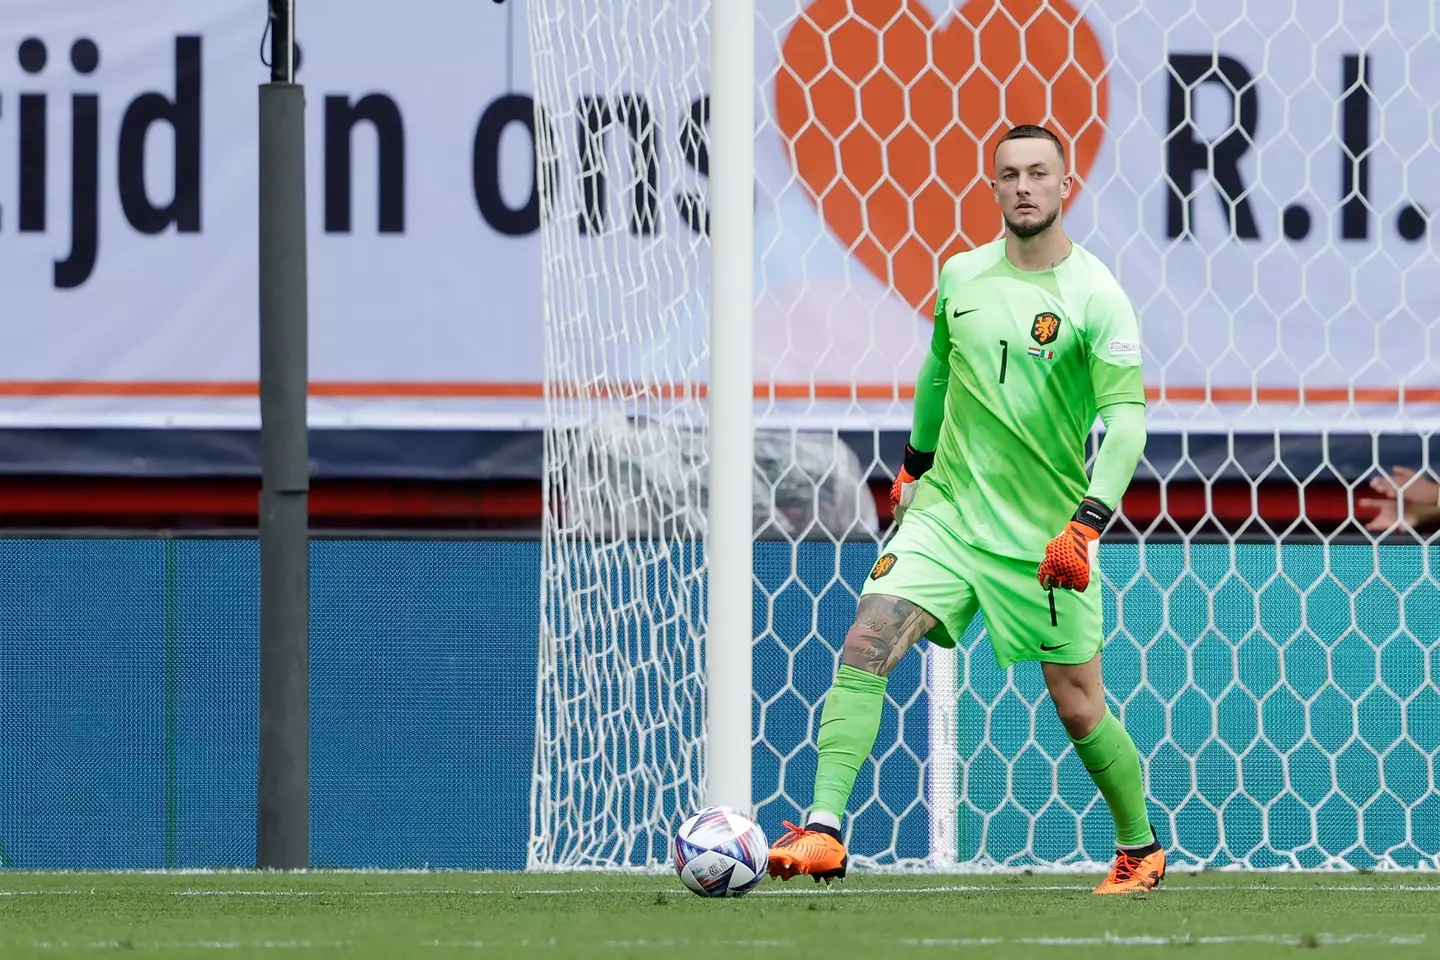 Bijlow played for Netherlands in the Nations League recently. Image: Getty